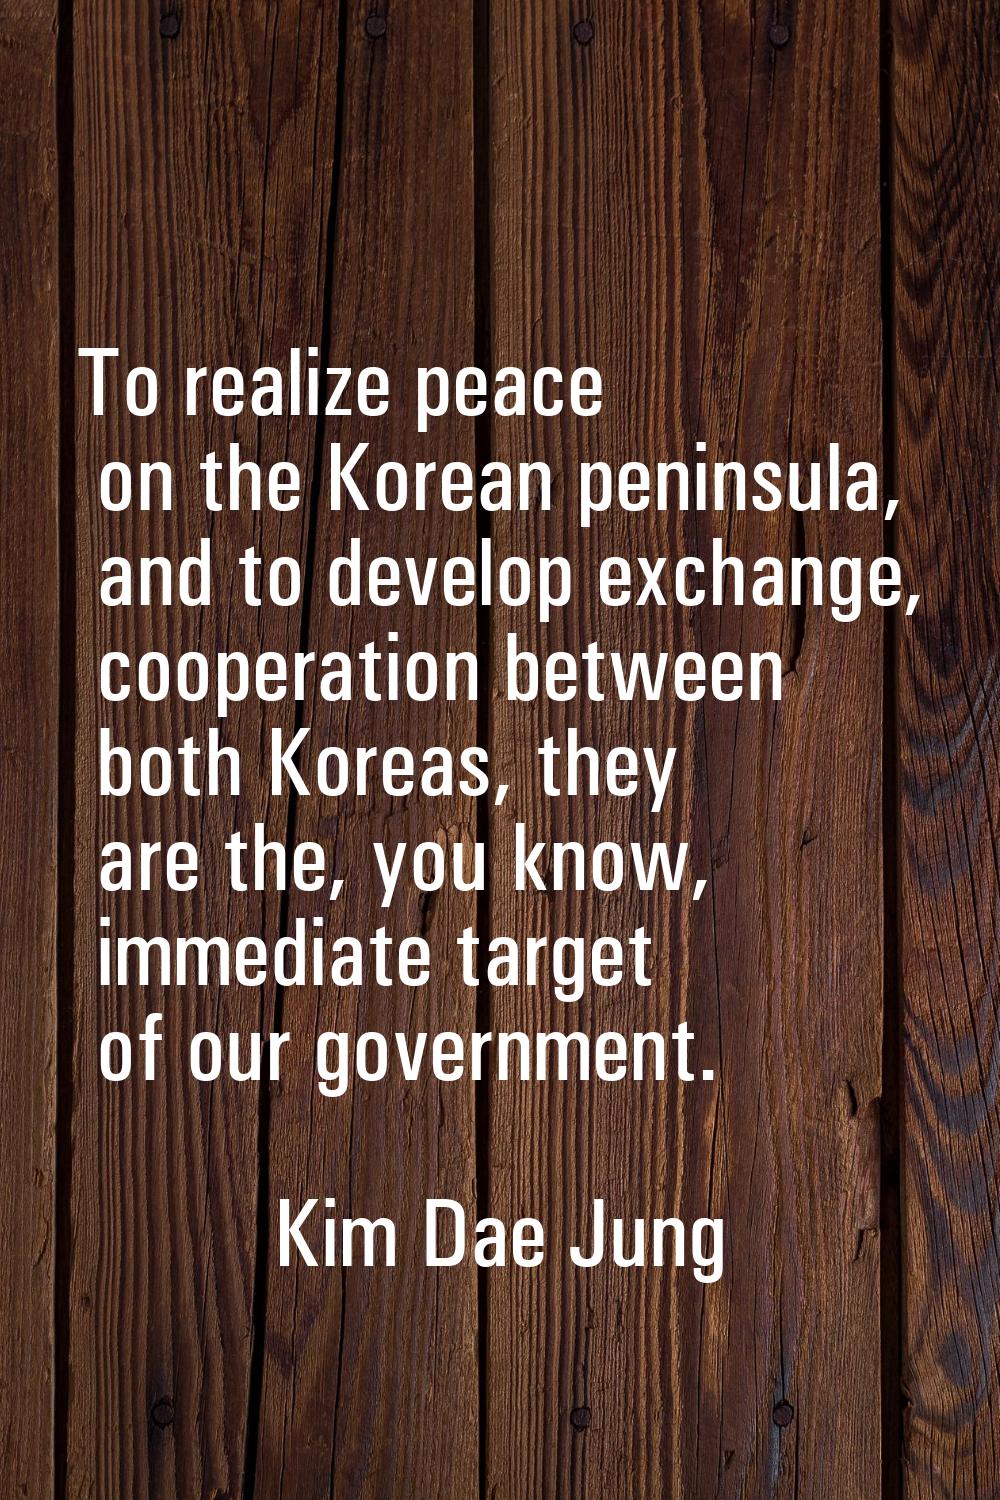 To realize peace on the Korean peninsula, and to develop exchange, cooperation between both Koreas,